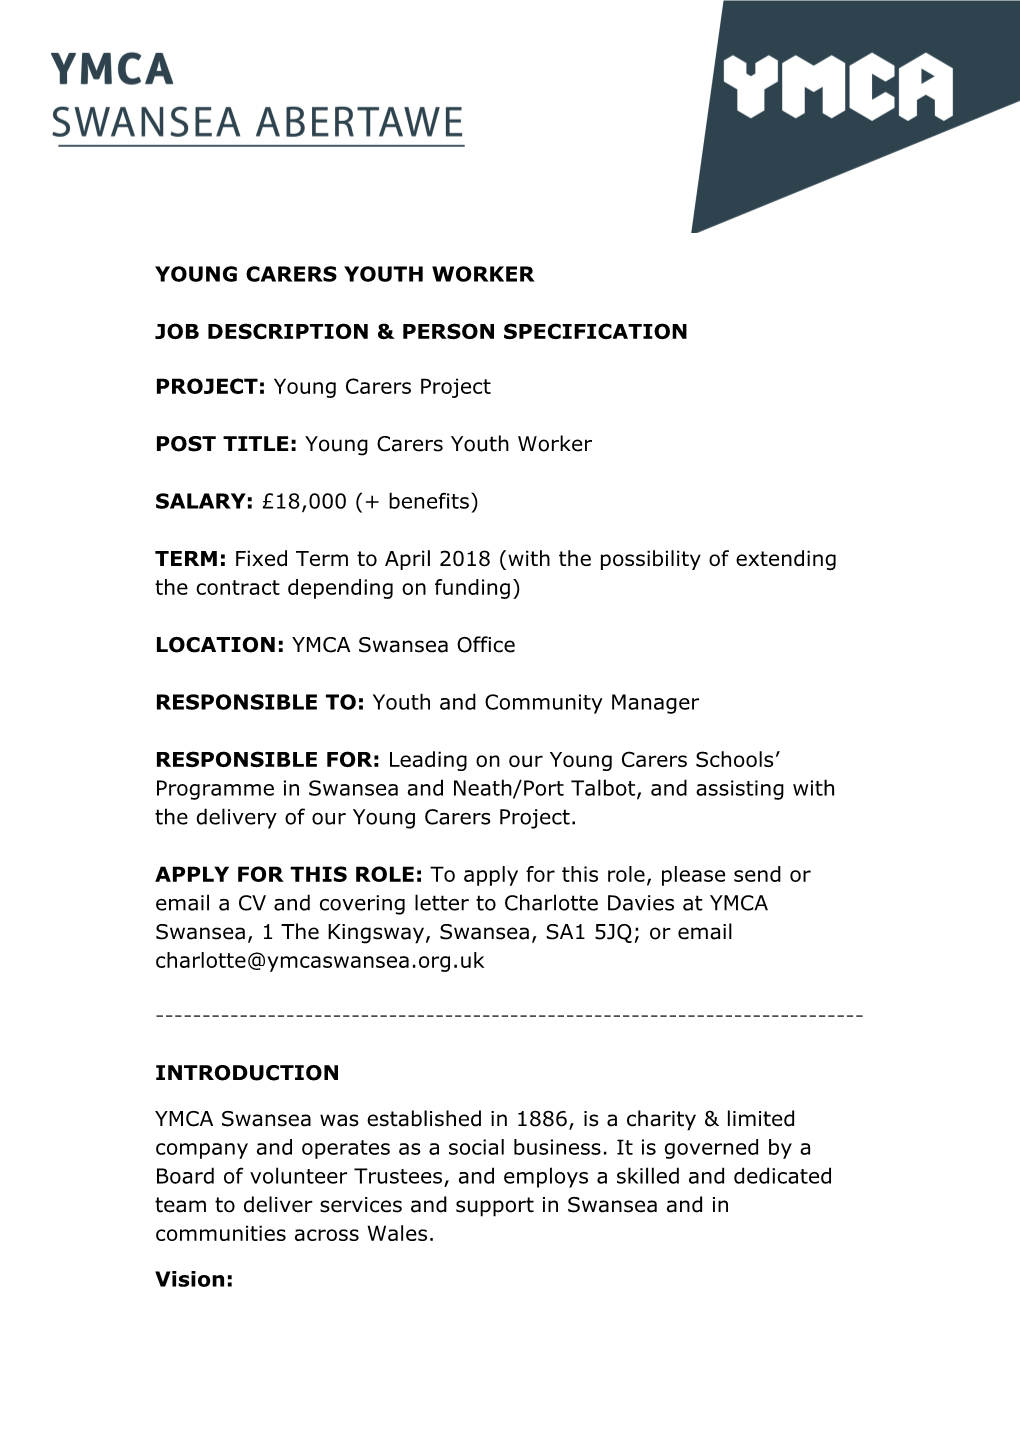 Young Carers Youth Worker